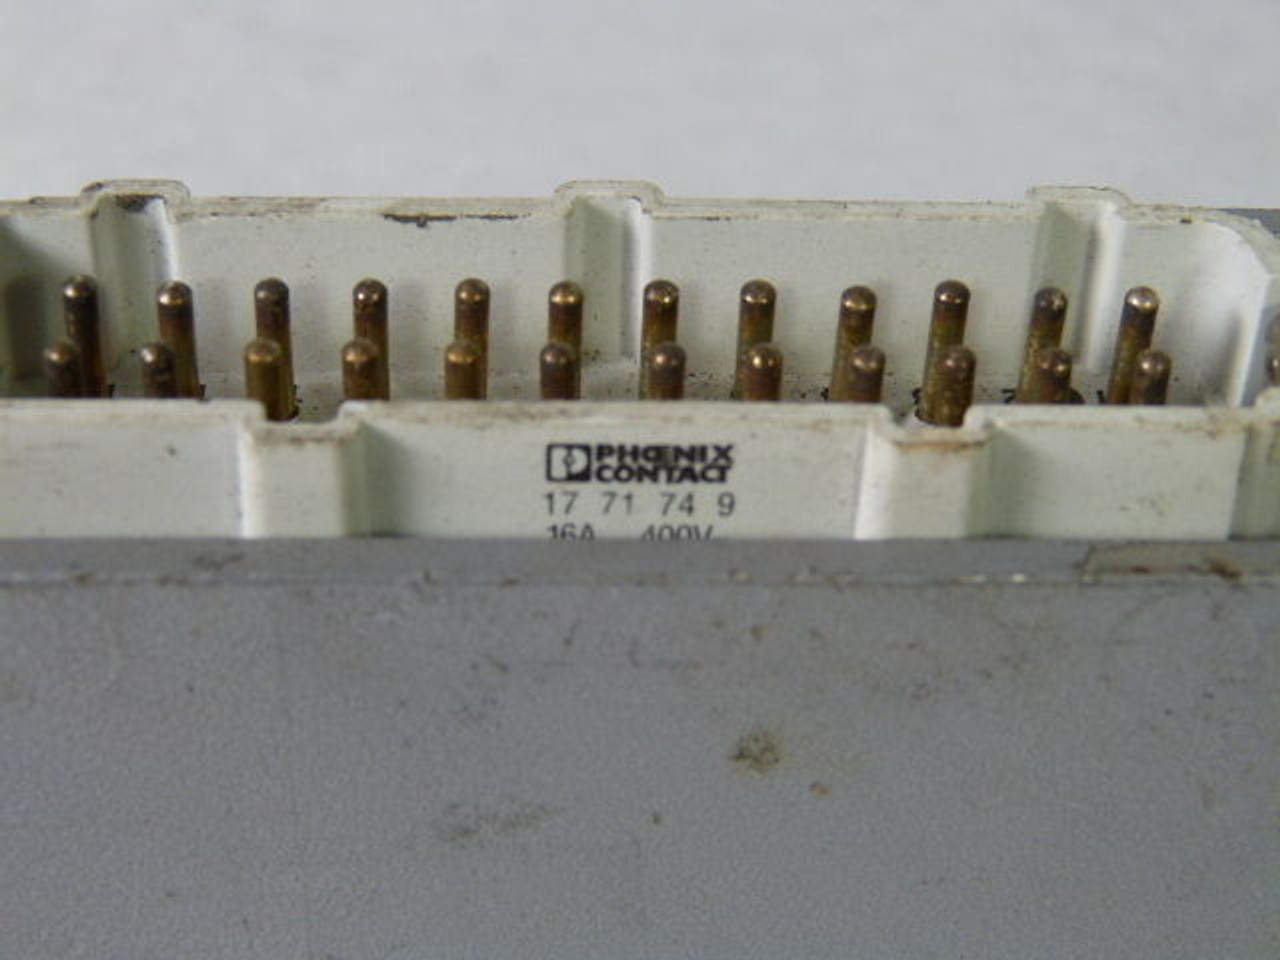 Phoenix Contact 17-71-74-9 Male Plug 16amp 400V With Enclosure USED